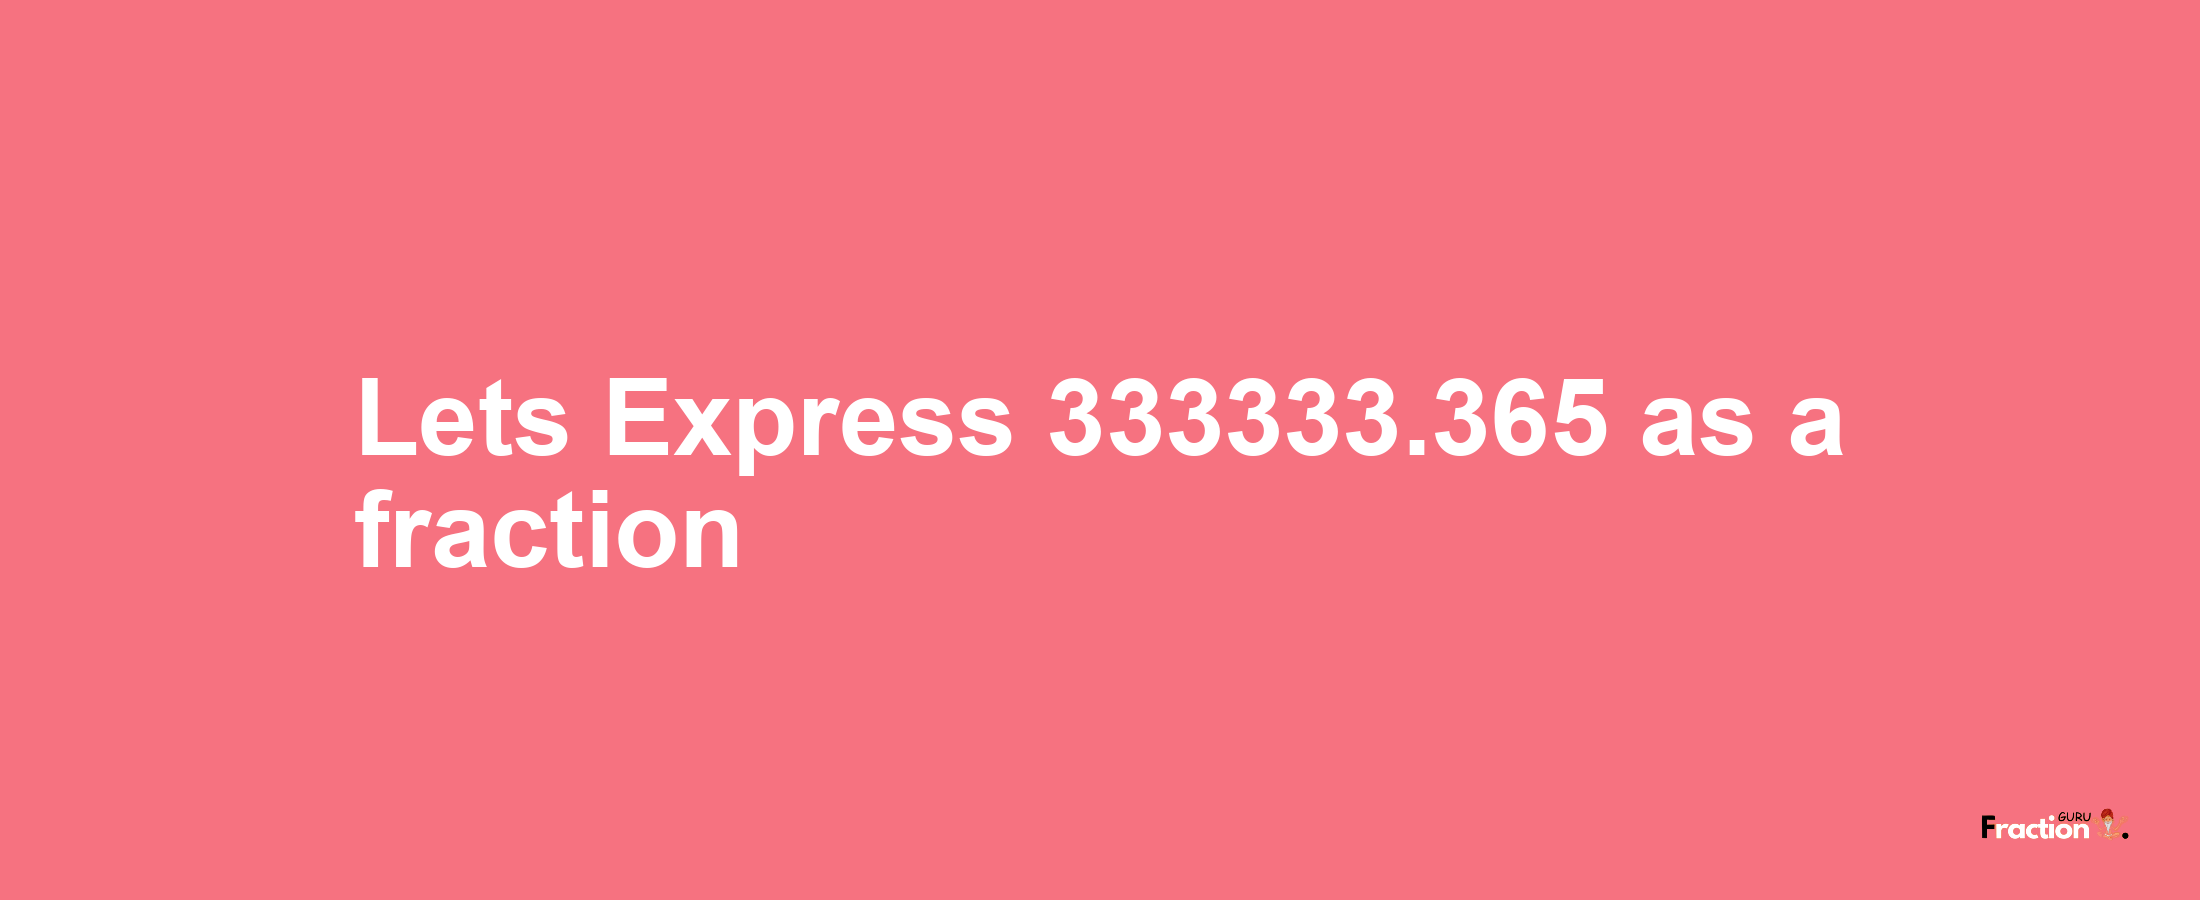 Lets Express 333333.365 as afraction